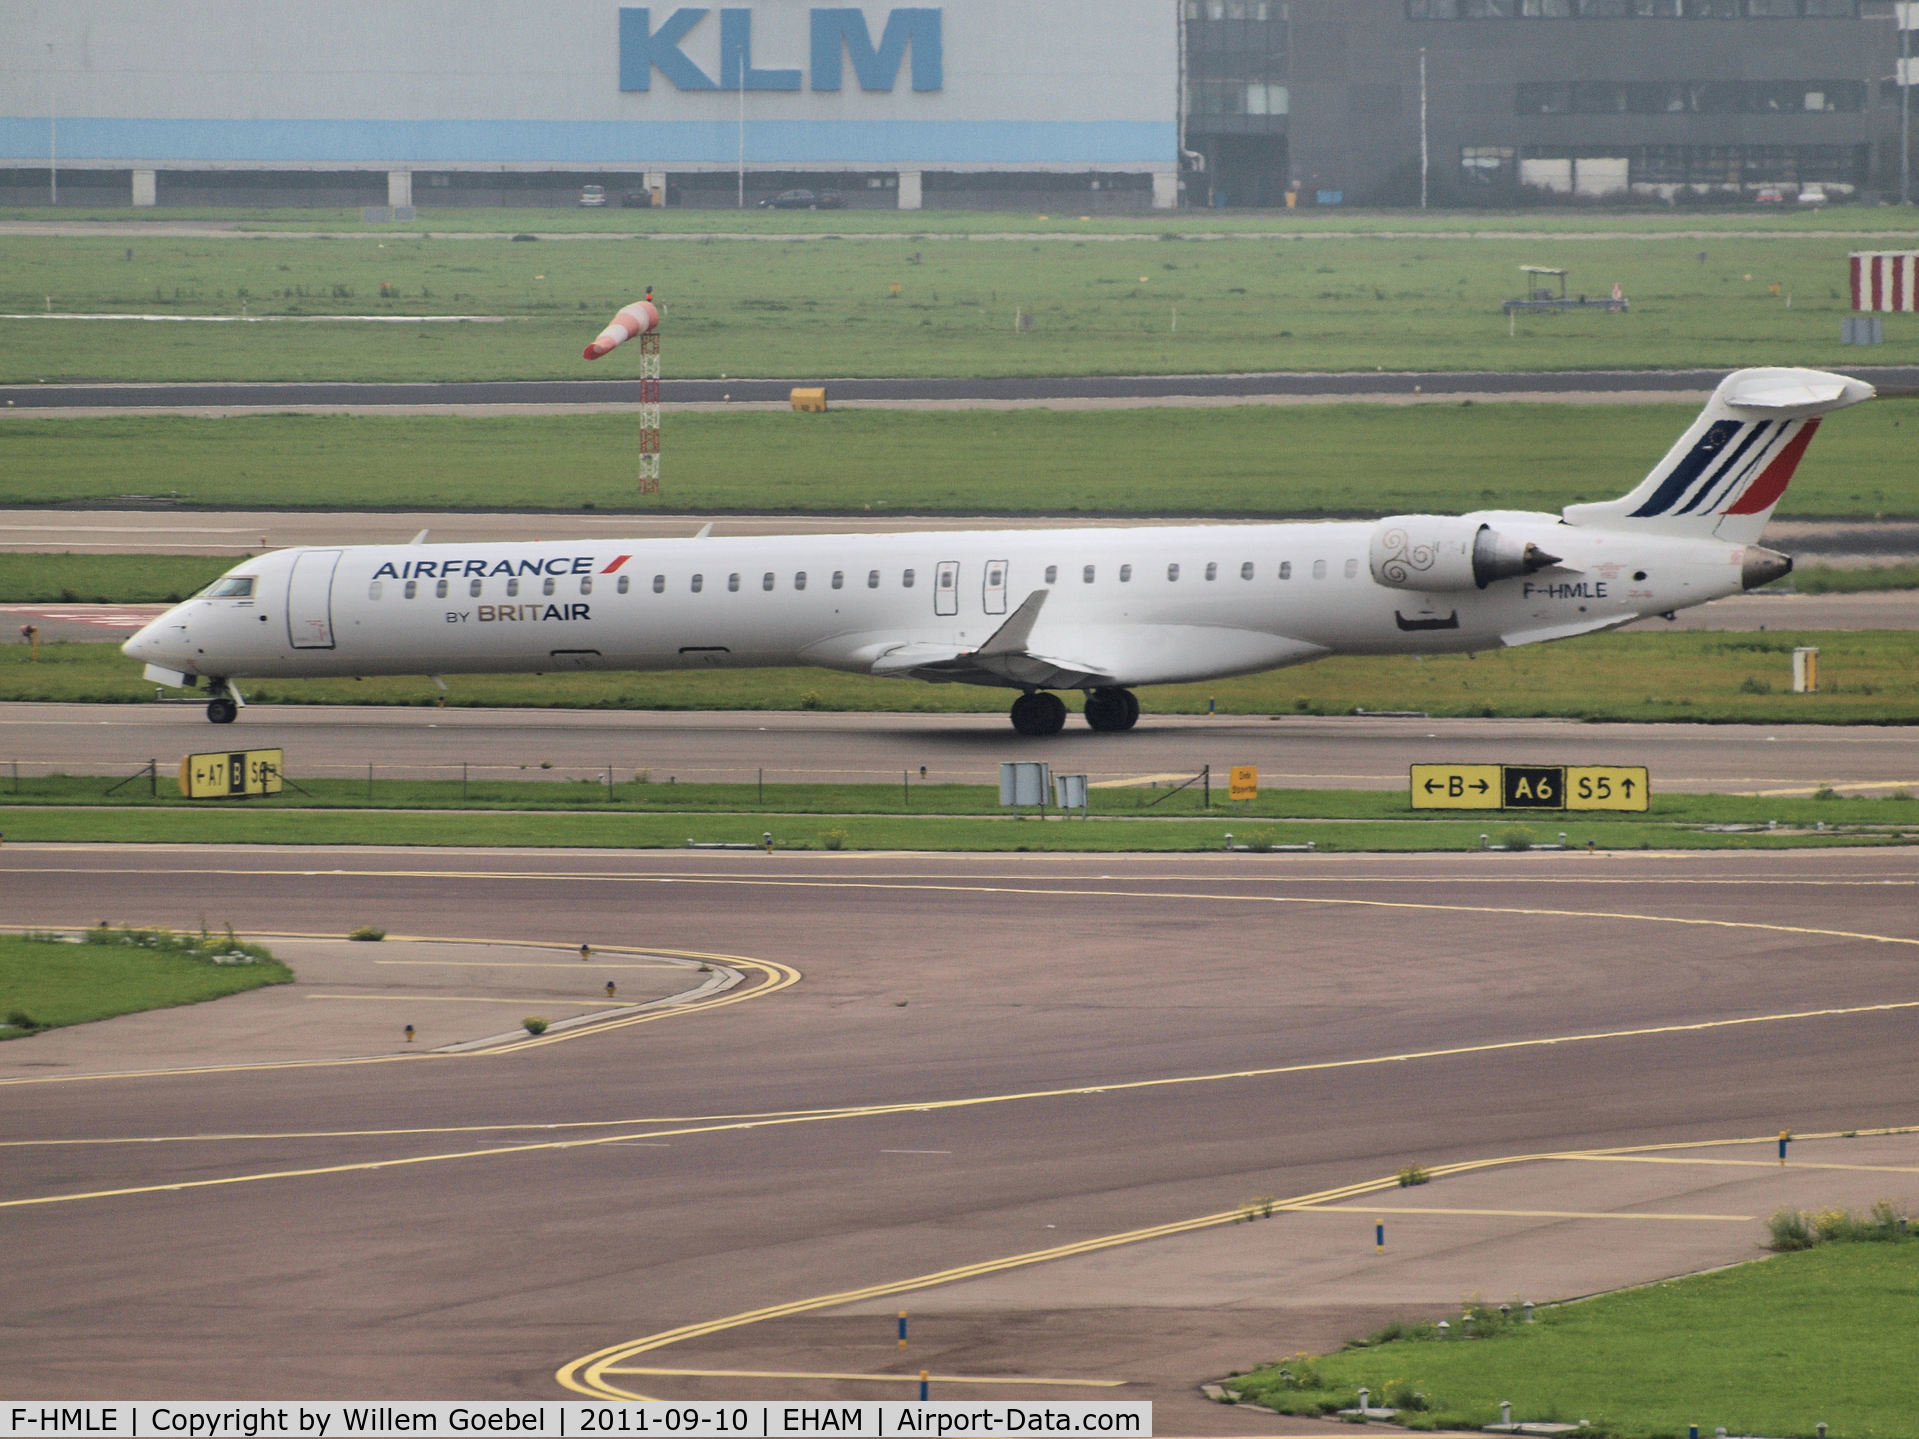 F-HMLE, 2010 Bombardier CRJ-1000EL NG (CL-600-2E25) C/N 19009, Taxi to the runway of 